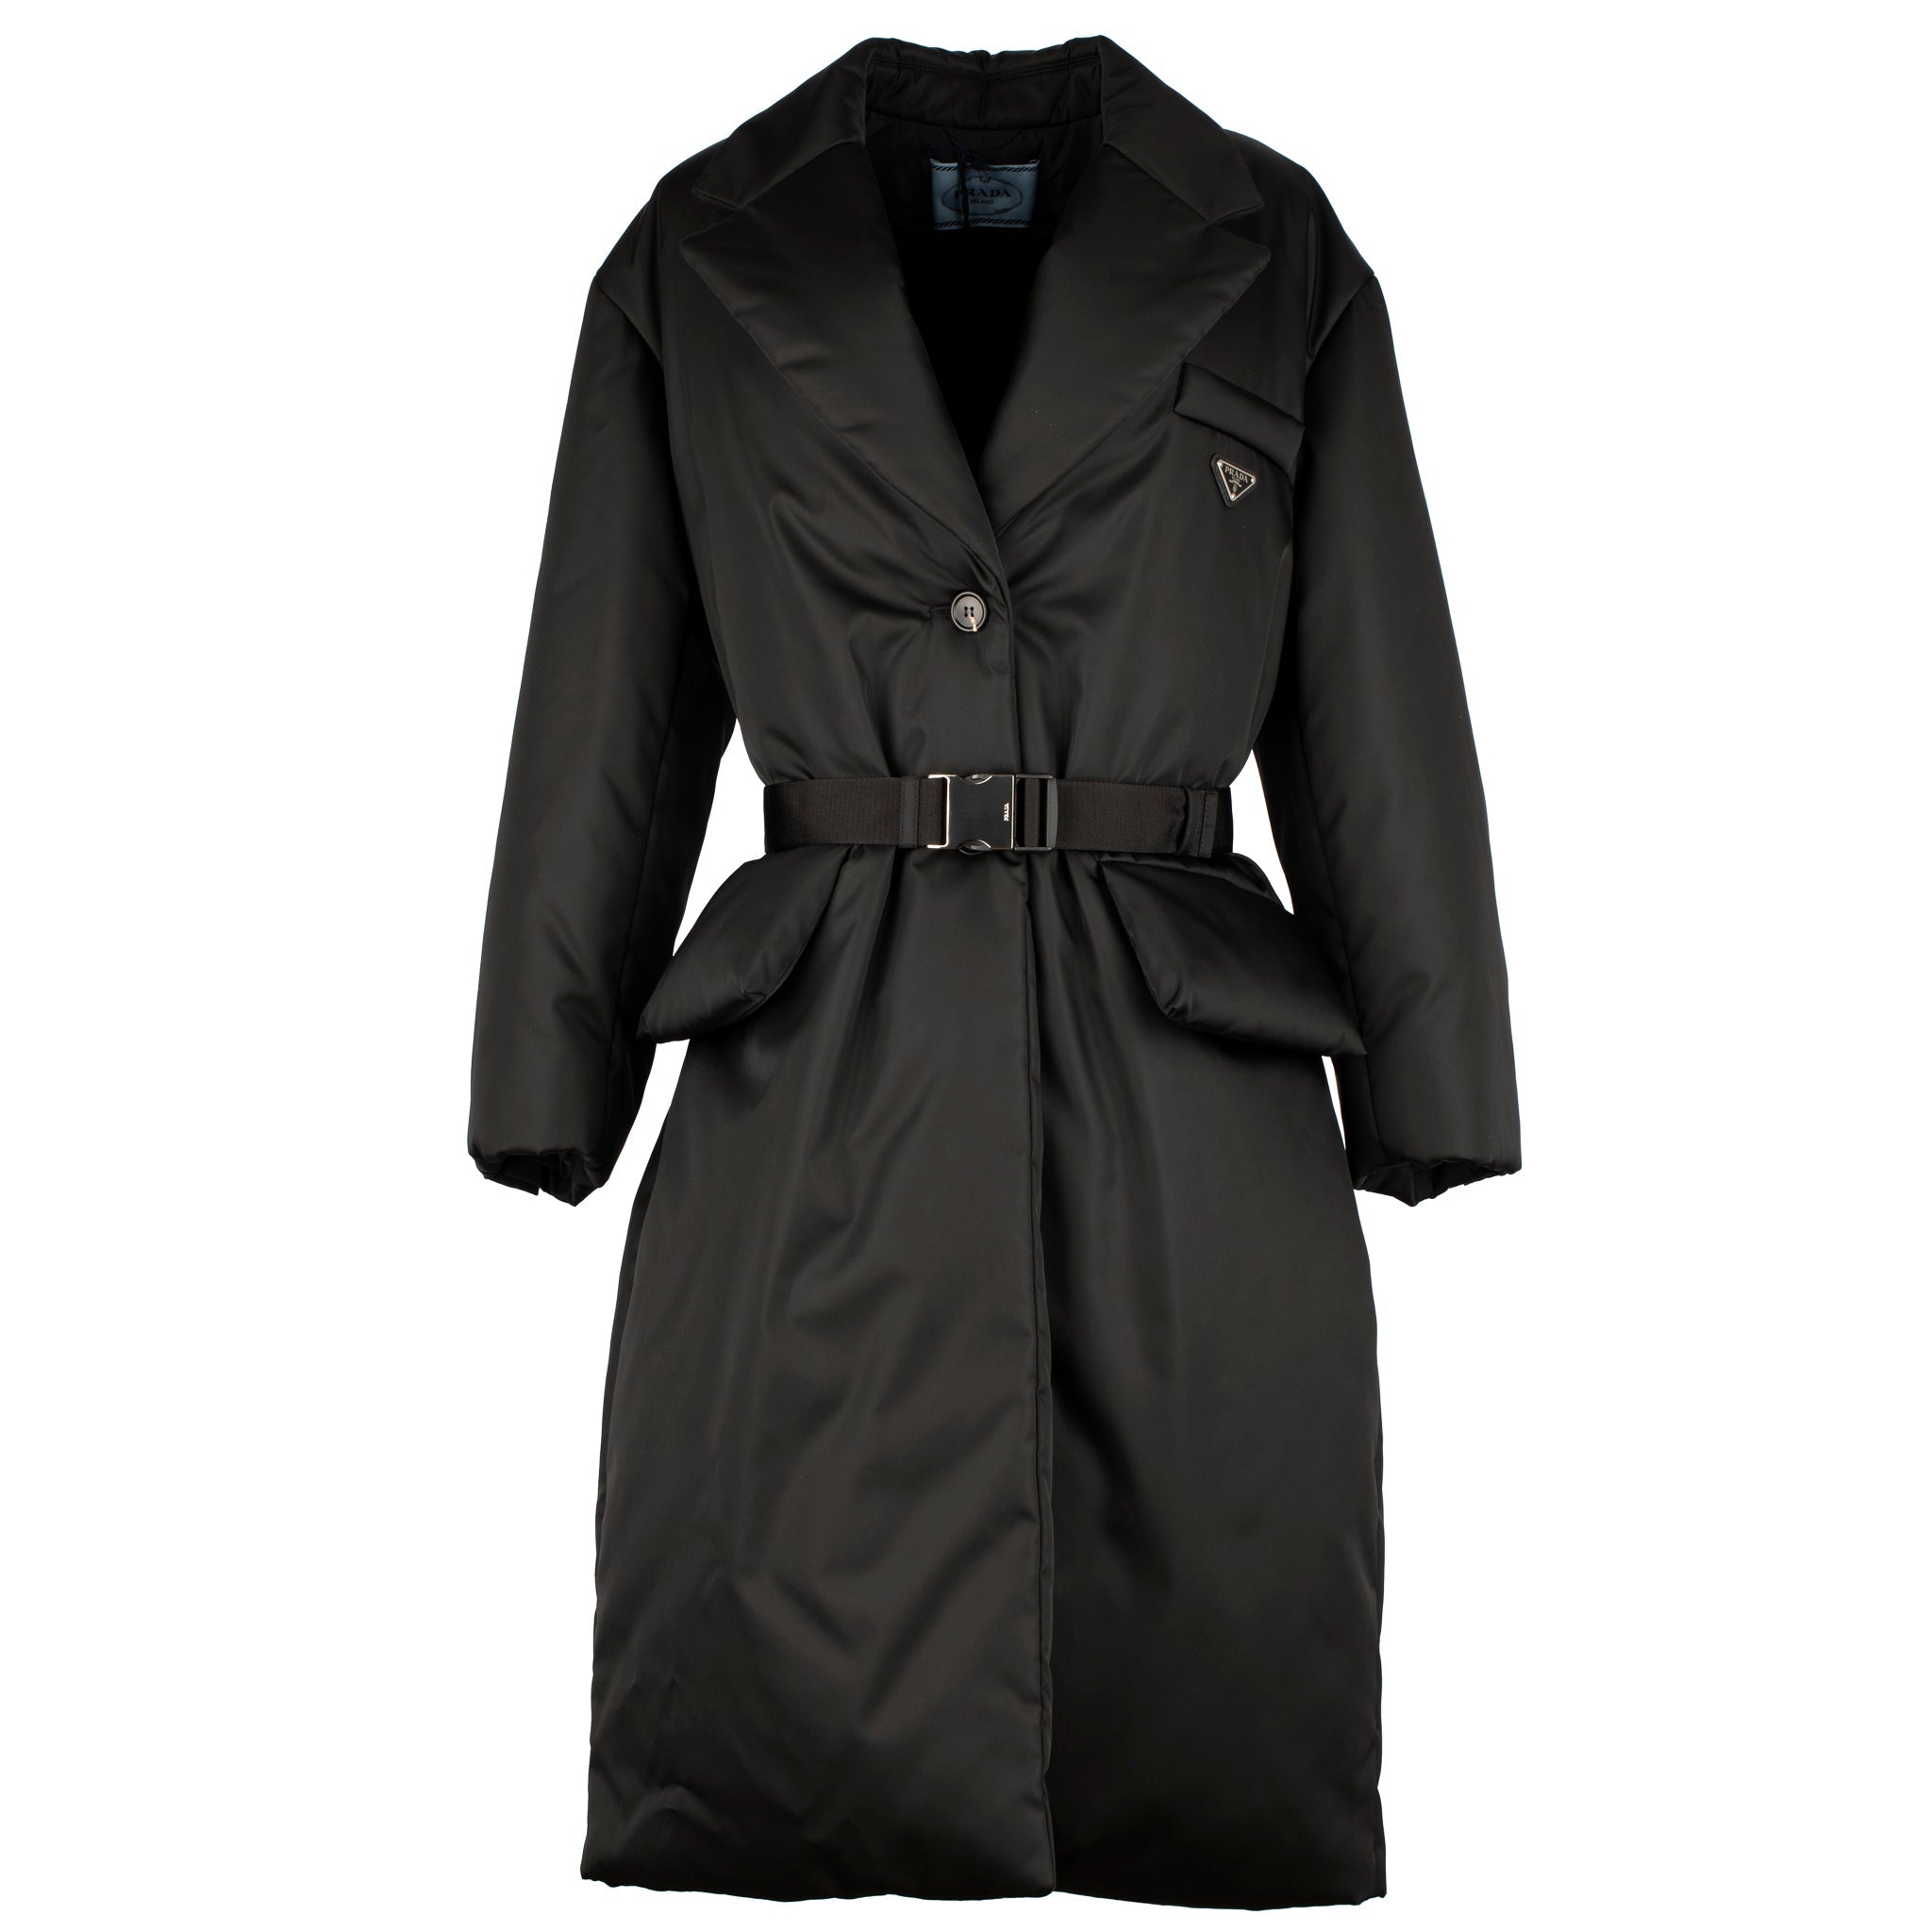 PRADA RE-NYLON BLACK QUILTED COAT WITH BELT 40 IT - On Repeat